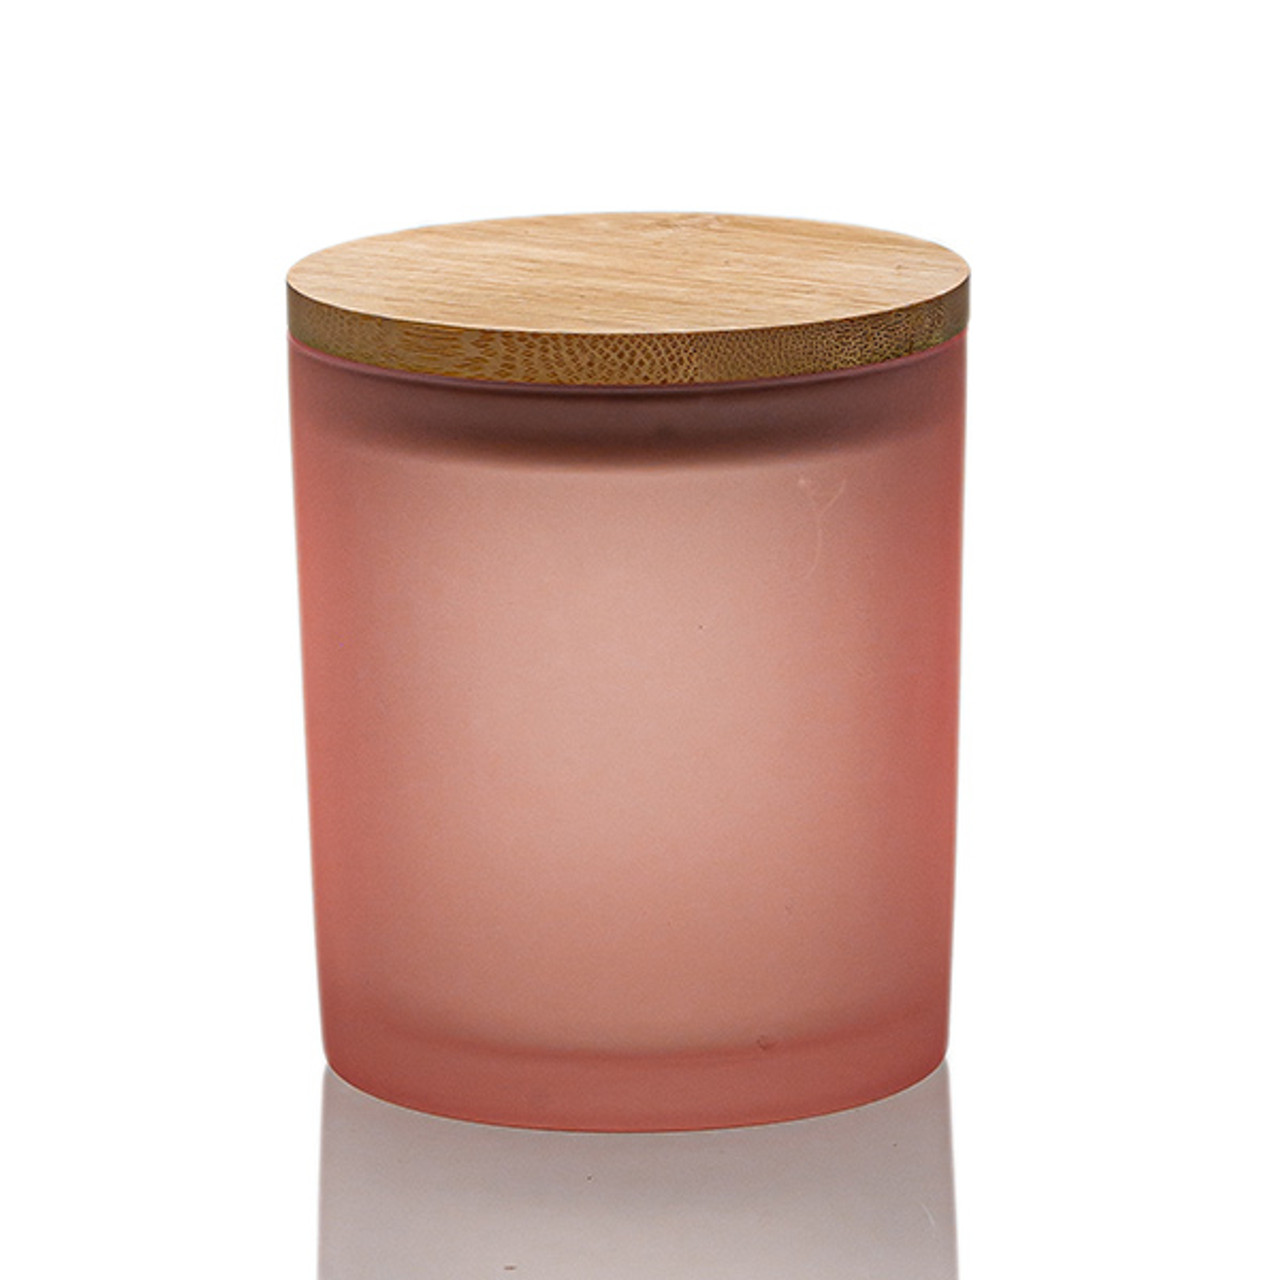 Rose Pink Colored Candle Jar - 14.5 oz with Bamboo Lid | 12 Pack